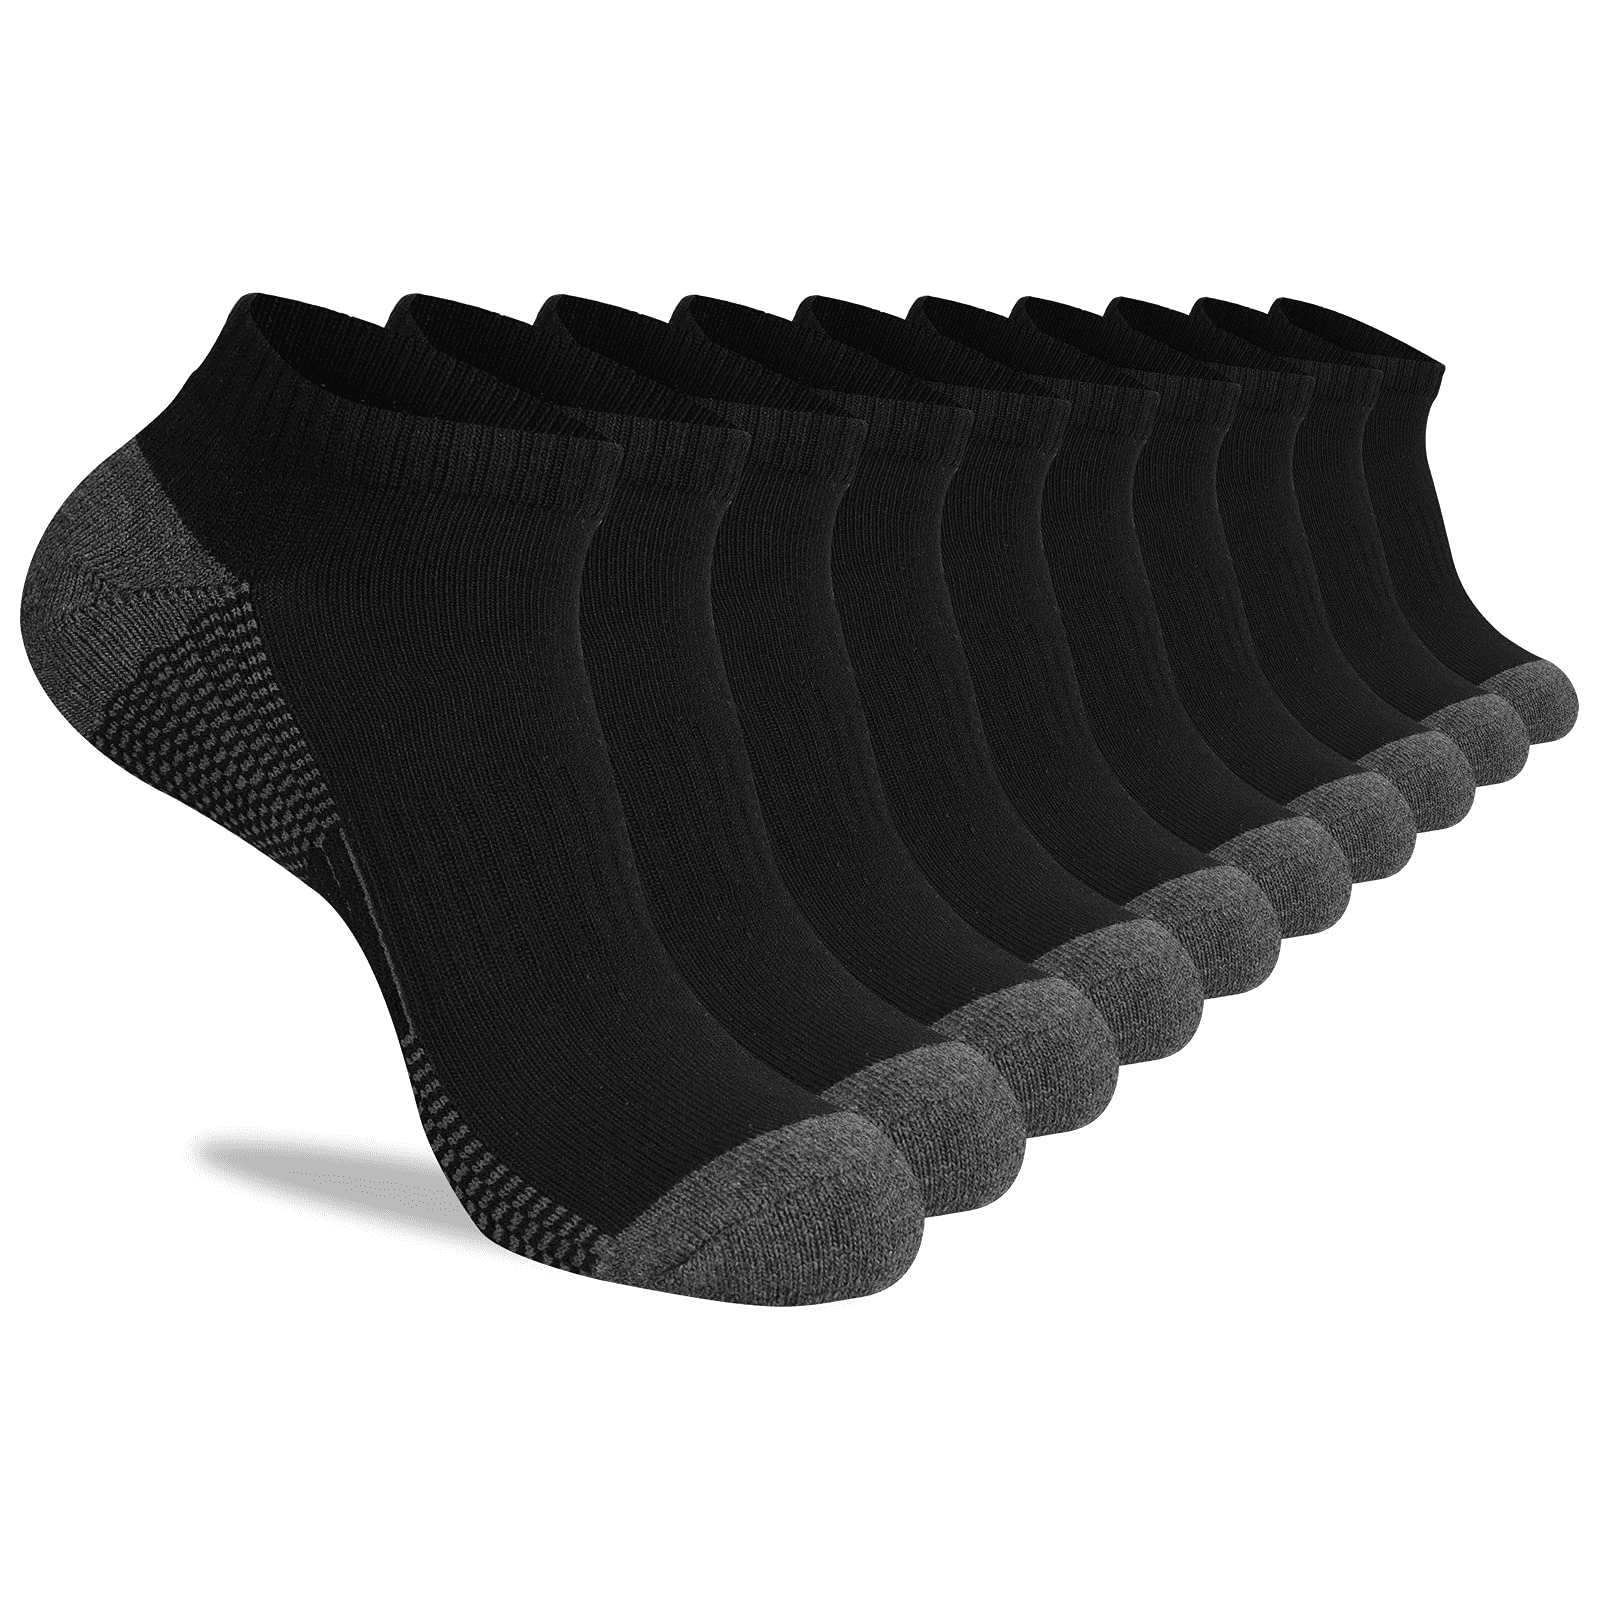 COOPLUS Mens 10 Pairs Athletic Ankle Socks Men's Breathable Low Cut ...